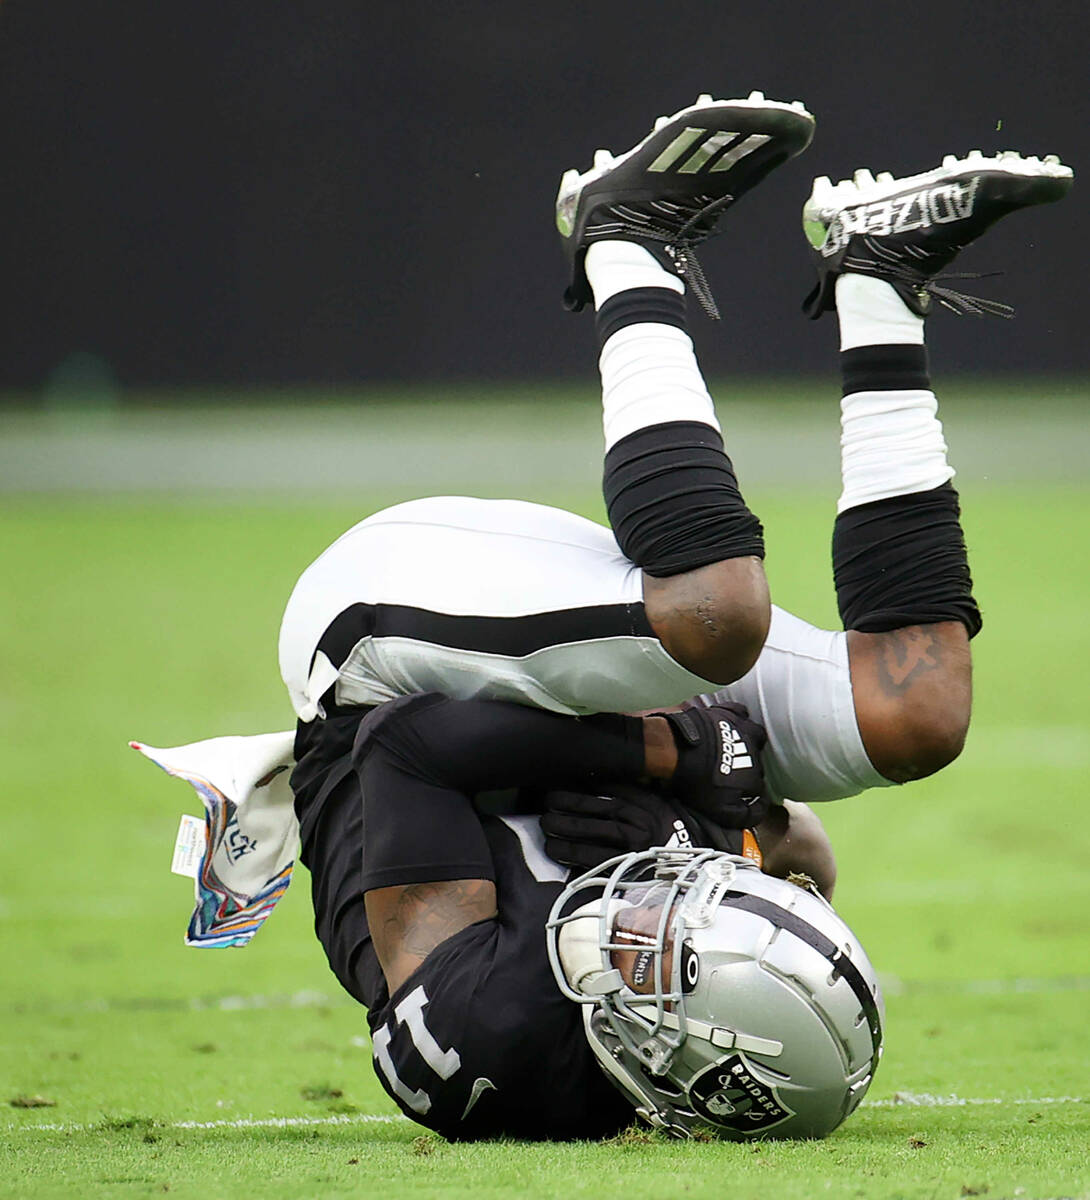 Raiders wide receiver Henry Ruggs III (11) makes a catch during the first half of an NFL footba ...